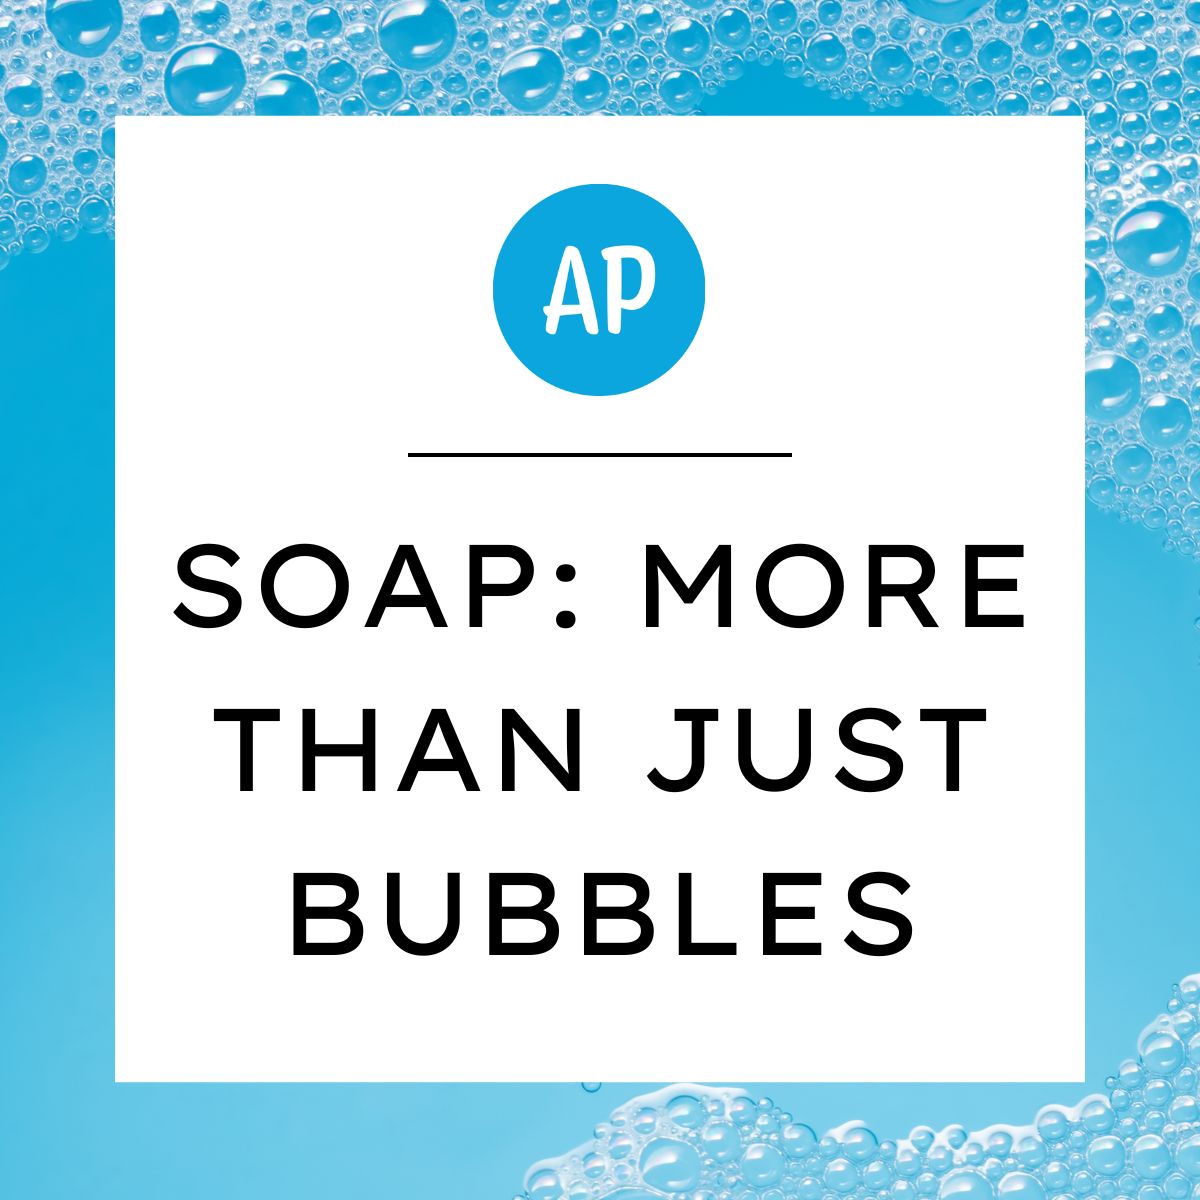 Soap: More than just bubbles